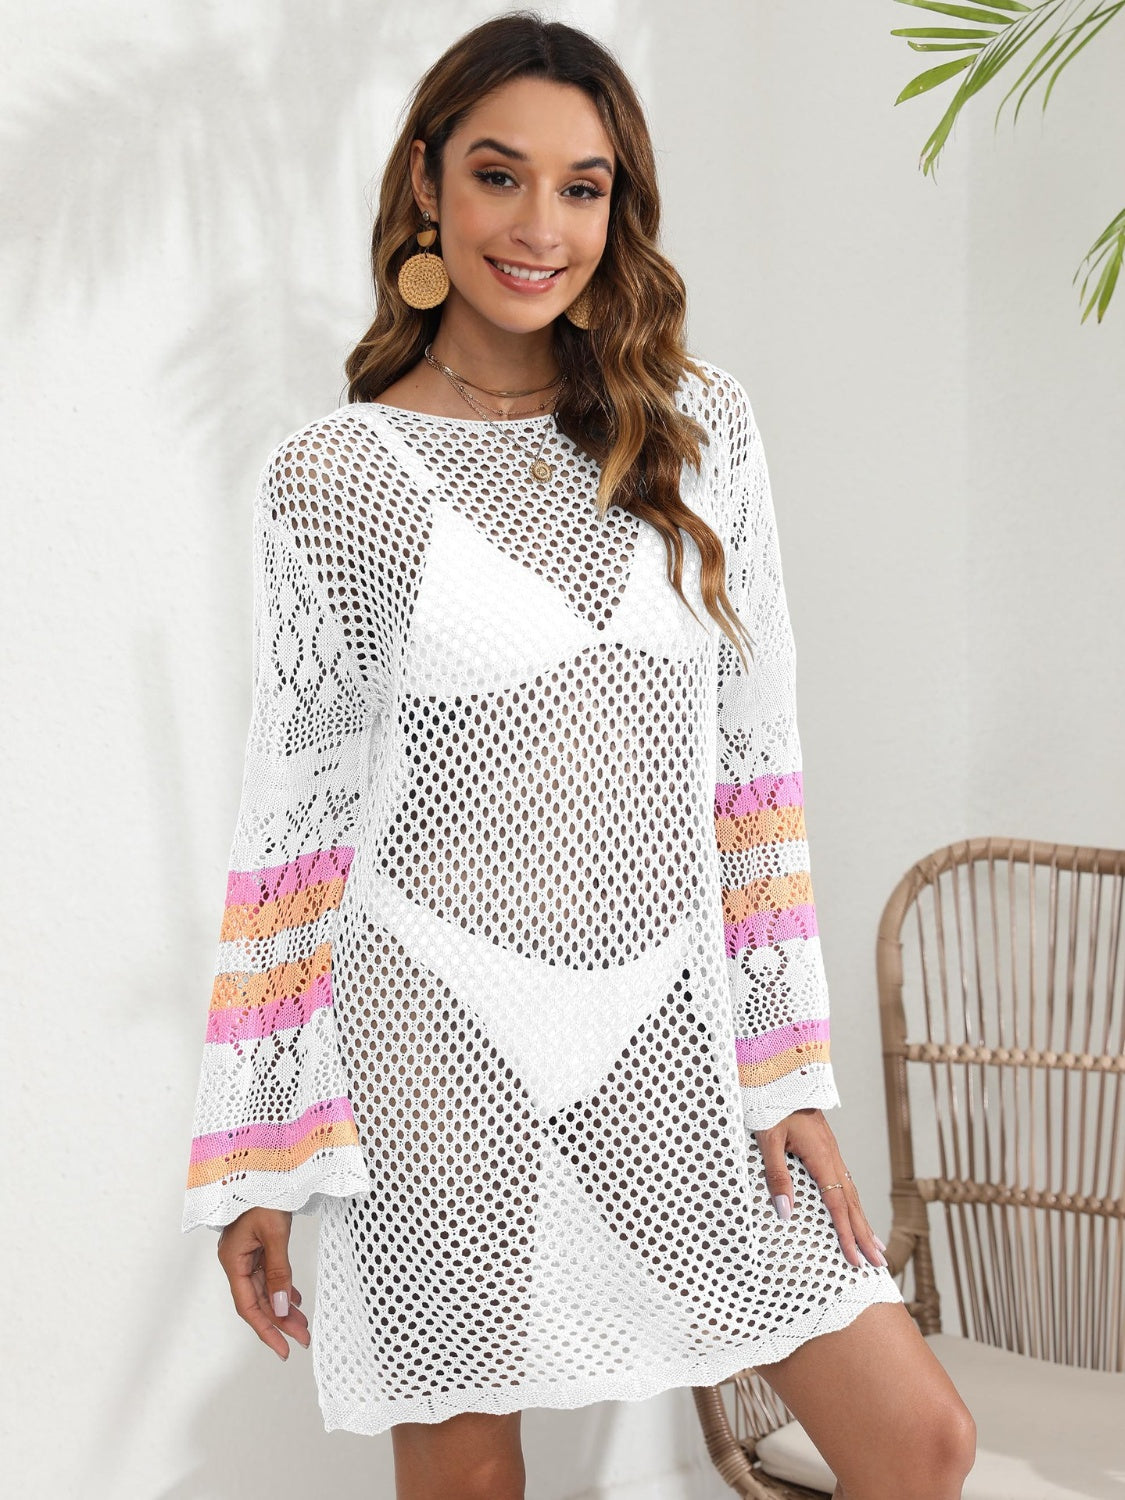 Sunset Vacation  Openwork Contrast Long Sleeve Cover-Up  Sunset and Swim   